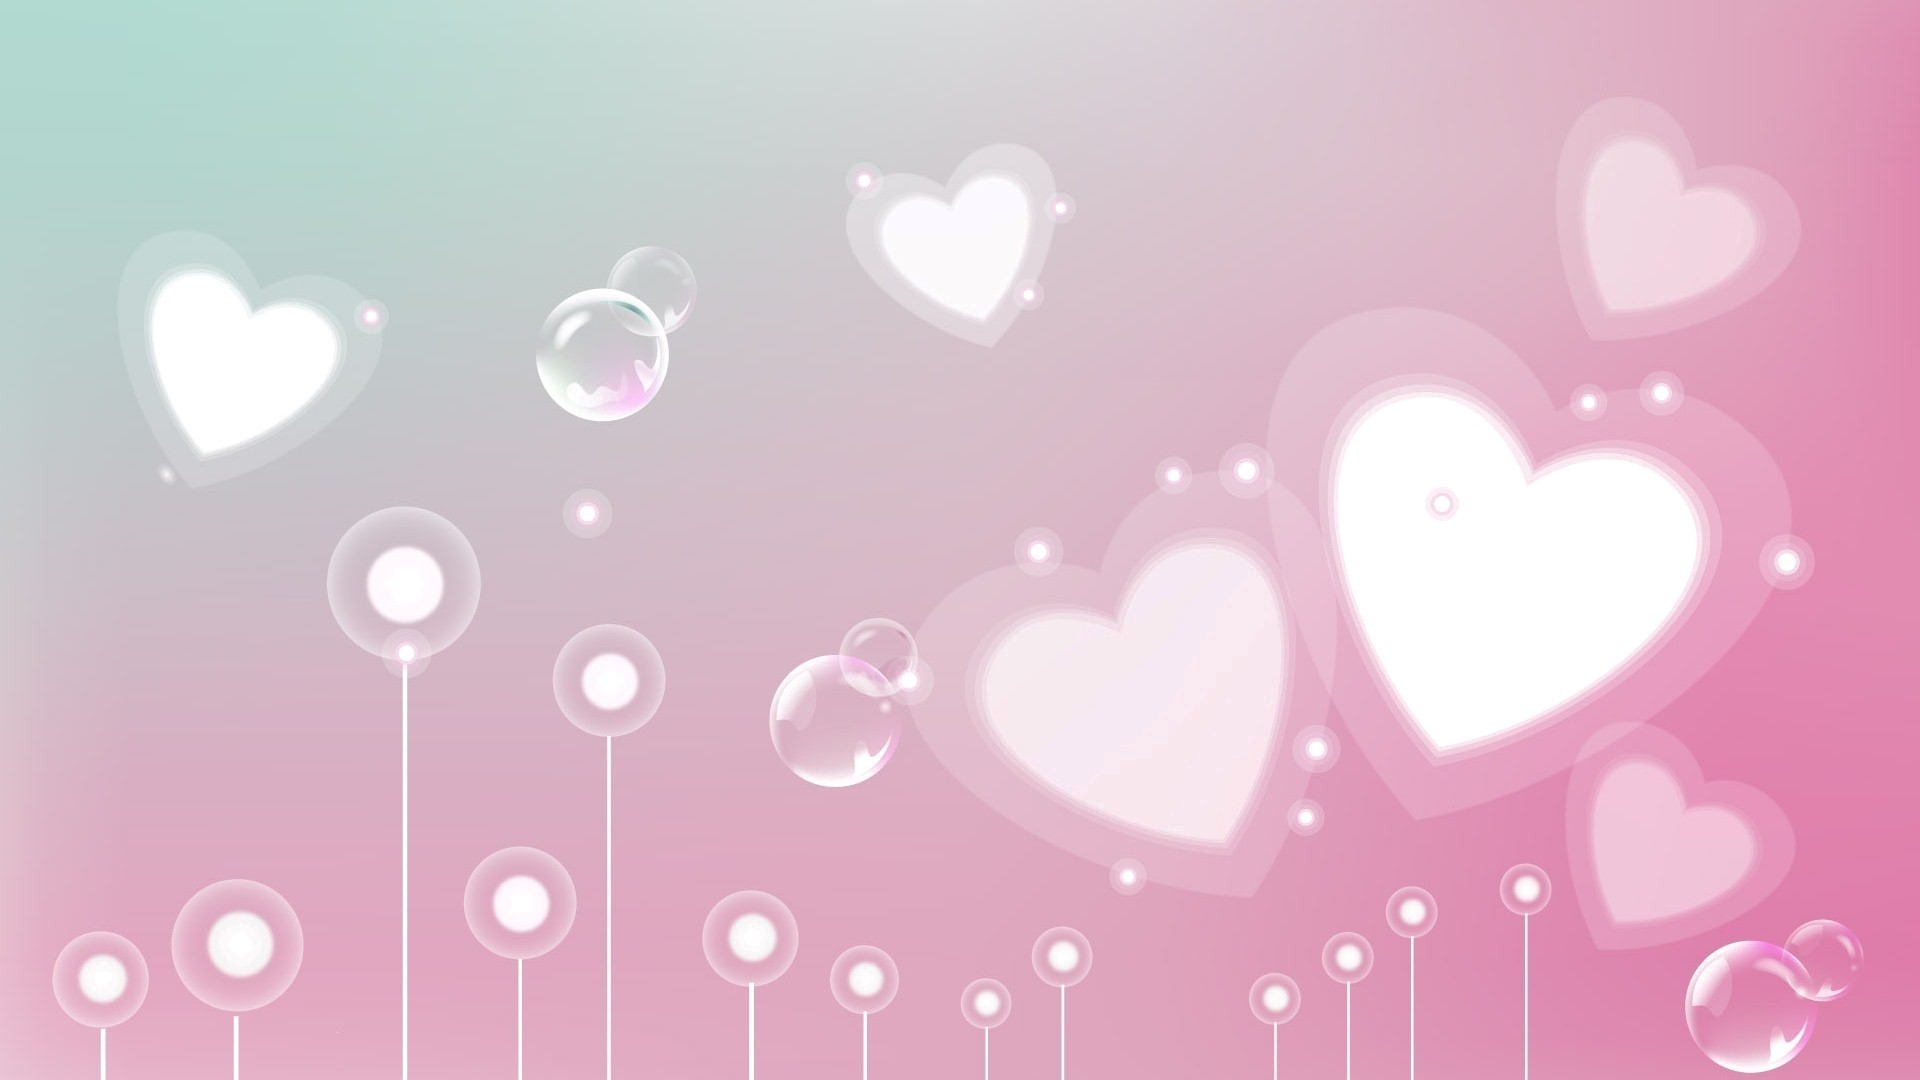 1920x1080 pink heart background - Google Search